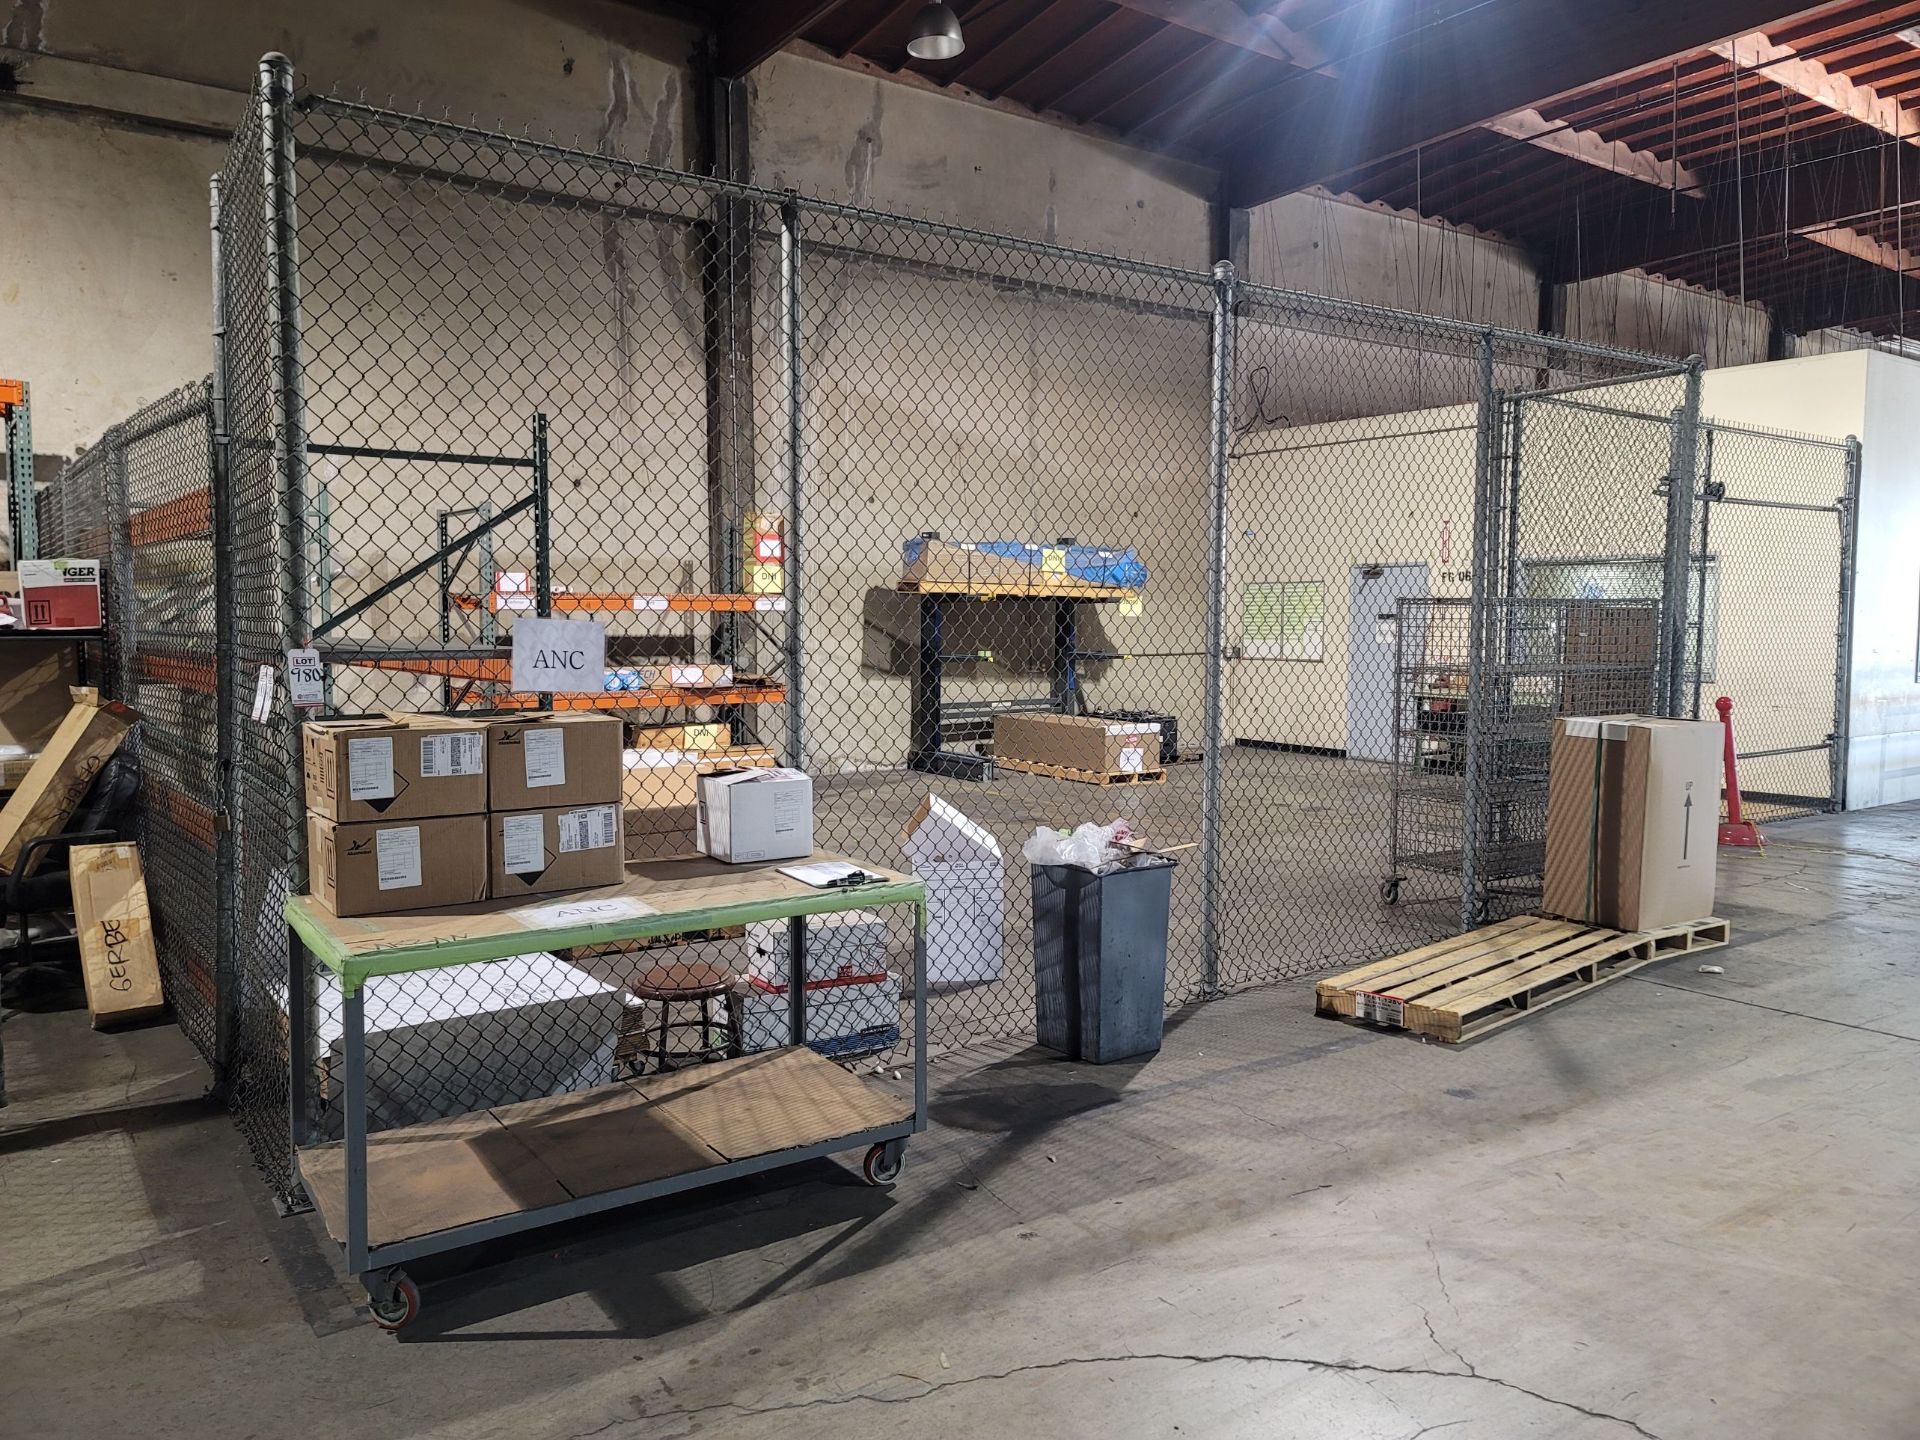 CHAIN LINK FENCE, 45' X 8' AND (1) 9' ROLLING GATE, (BUILDING 25)